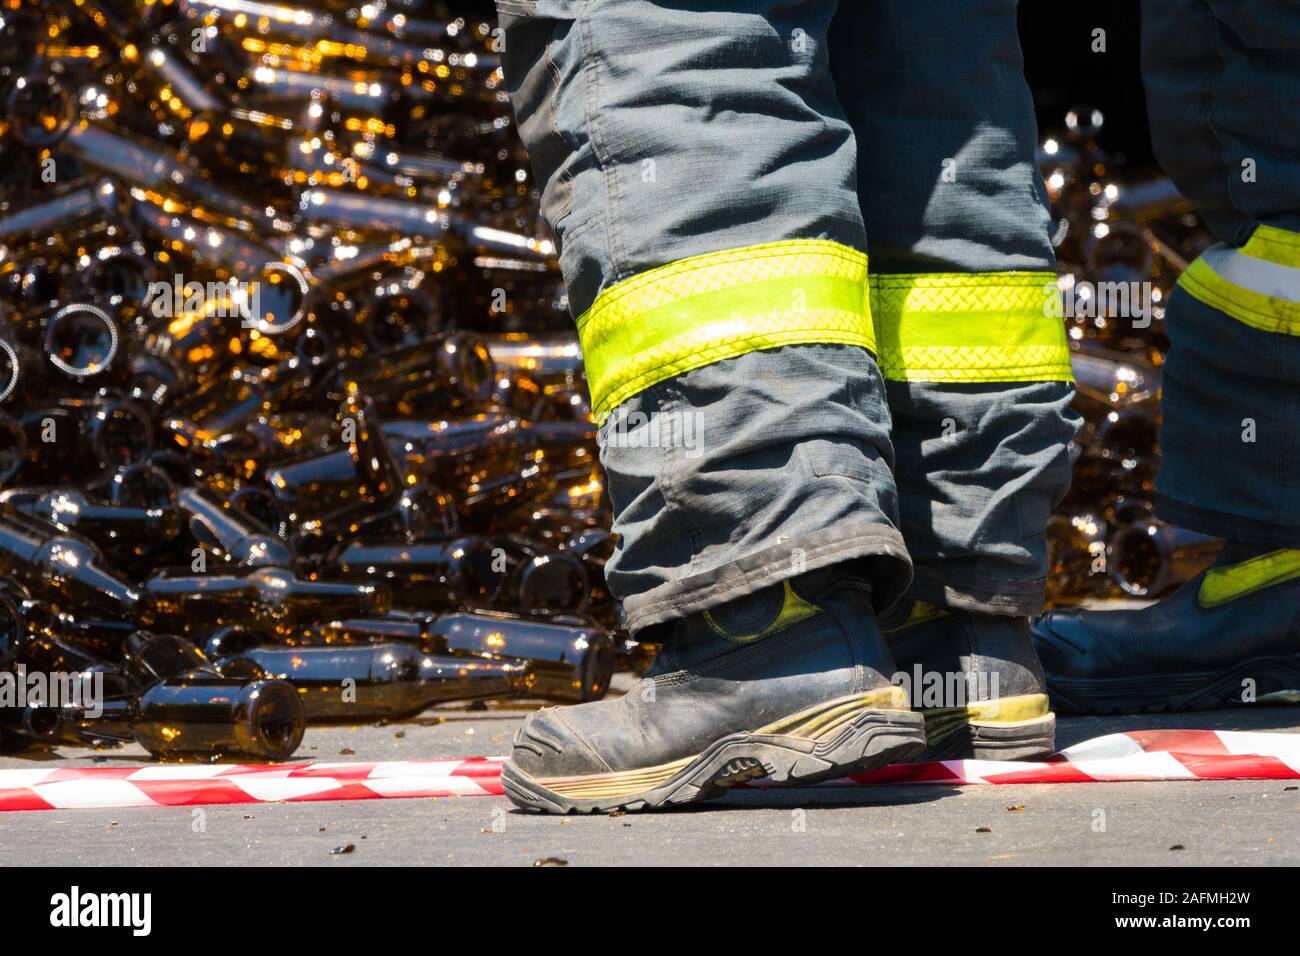 fireman, firefighter, emergency worker wearing high visibility pants and boots in the road with a heap of glass bottles at an accident scene cleanup Stock Photo